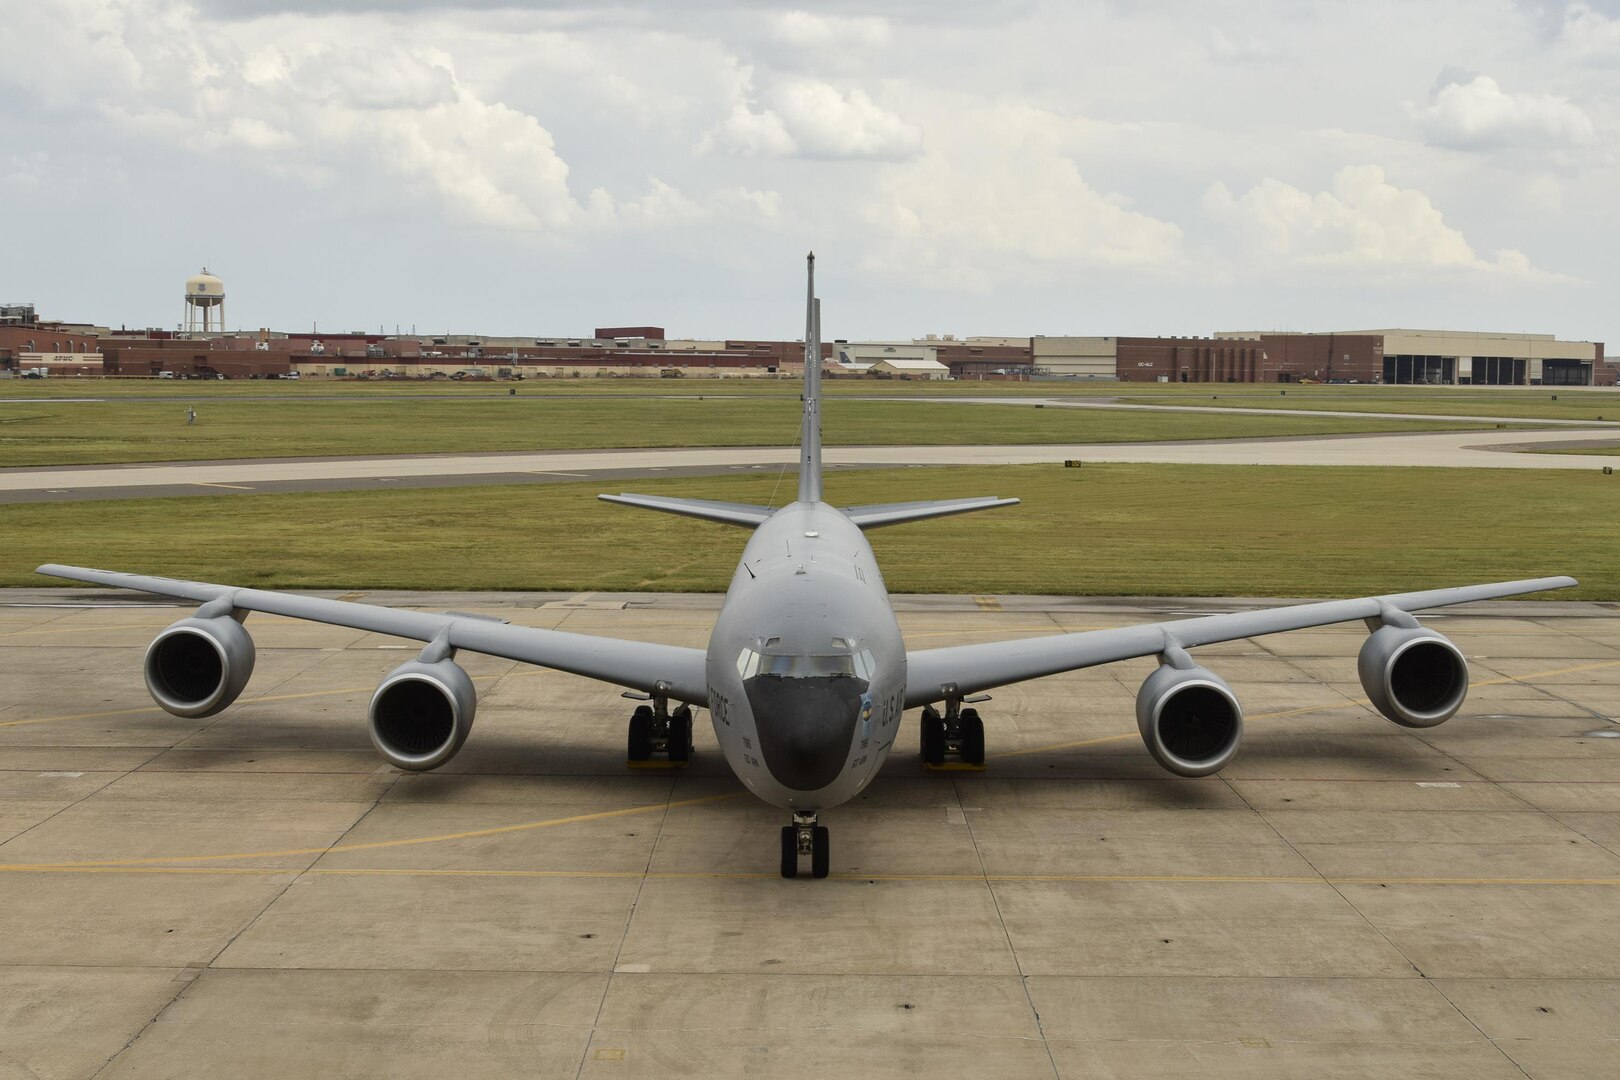 KC-135R Stratotanker of the 507th Air Refueling Wing, Air Force Reserve Command with the Oklahoma City Air Logistics Complex shown in the background Aug. 26, 2016, Tinker Air Force Base, Okla. OC-ALC and its parent organization, the Air Force Sustainment Center, plan and conduct depot-level maintenance on the KC-135, E-3 Airborne Warning and Control System aircraft and the E-6B Mercury operated by the U.S. Navy as well as B-1B, B-52H and B-2A bomber aircraft (not shown). (U.S. Air Force photo/Greg L. Davis)